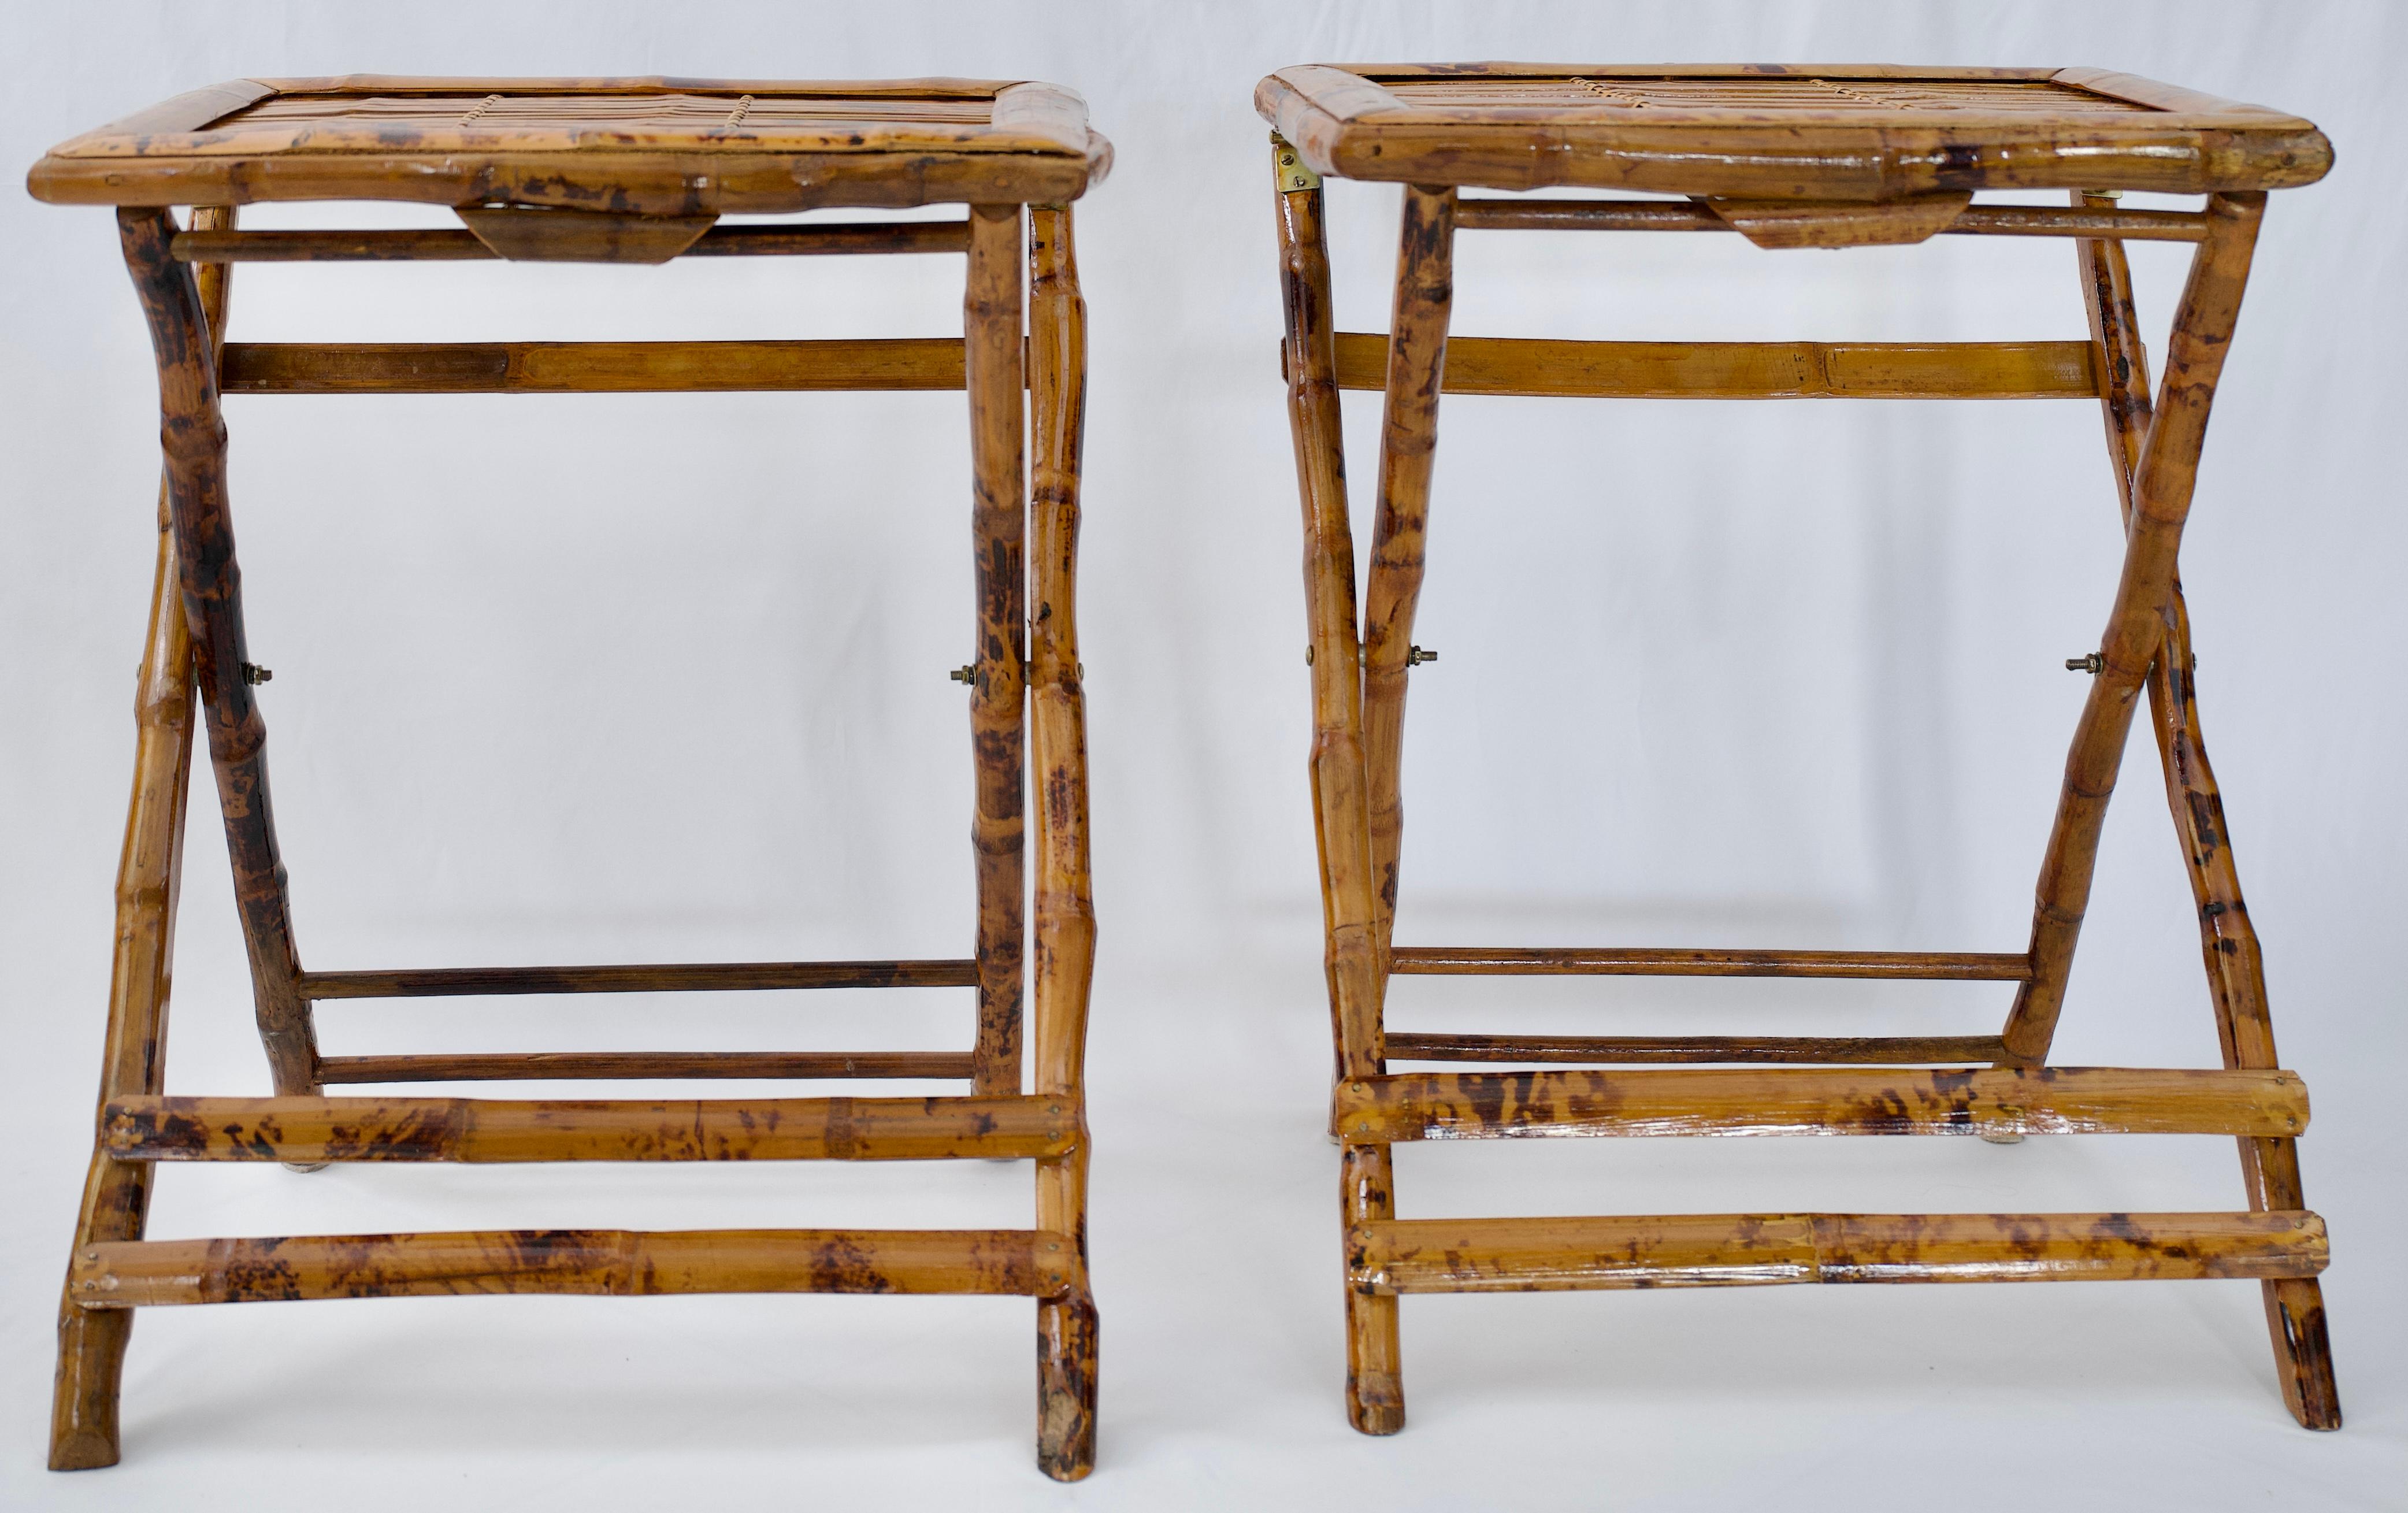 A good quality pair of bamboo end tables or side tables. The frame is very interesting and unusual because the tops fold. Made from imported bamboo these end tables feature splayed legs, joined by stretchers. This is a wonderful example of design